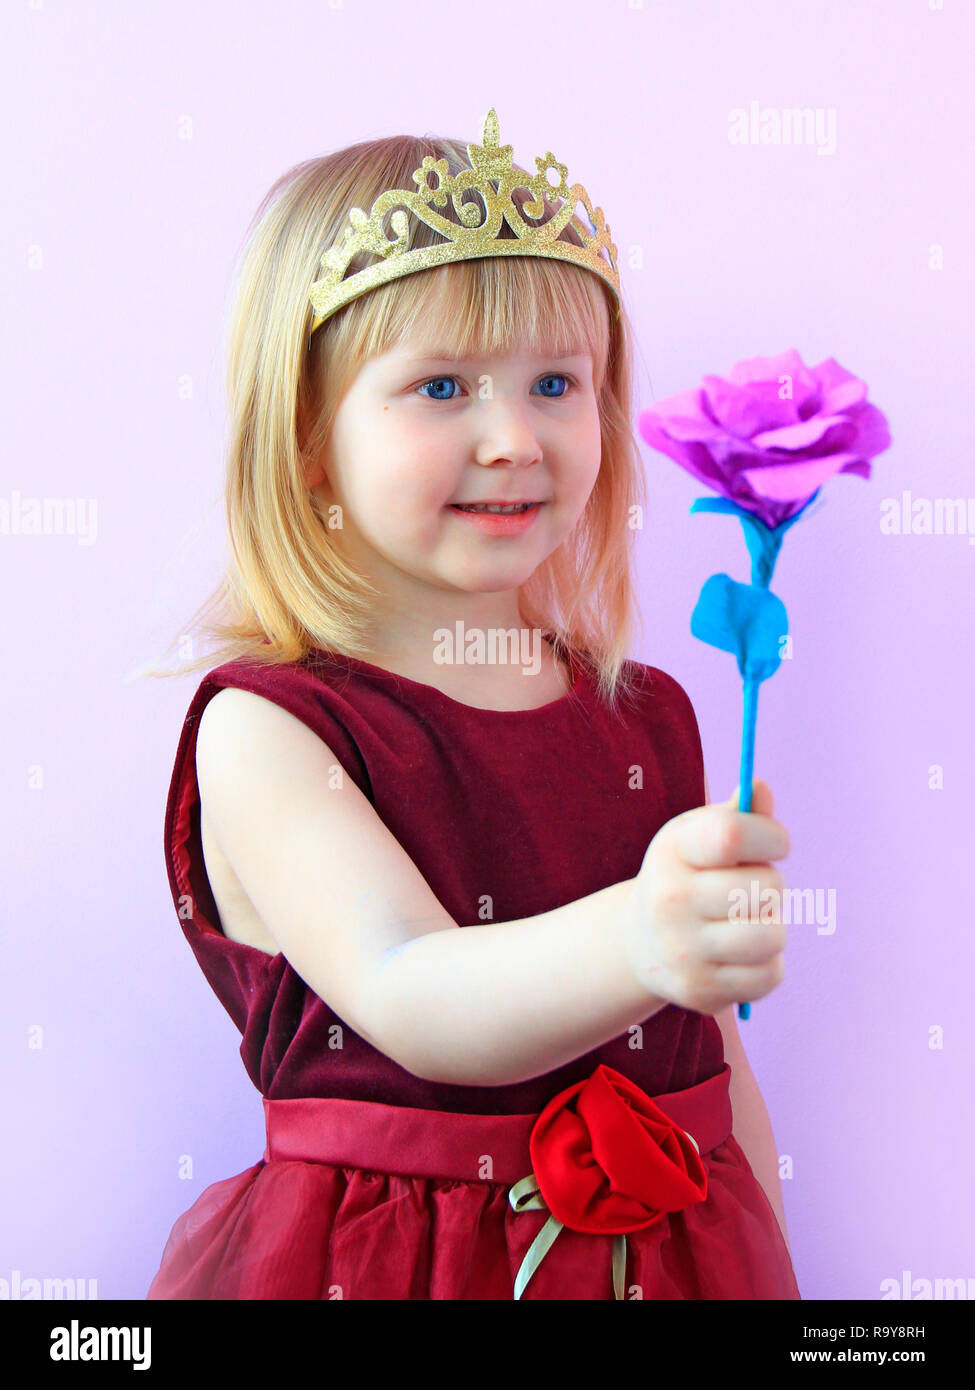 Little girl in crown giving flower. Little princess with pink flower. Cute girl with crown on head offering pink rose. Child in beautiful dress smilin Stock Photo